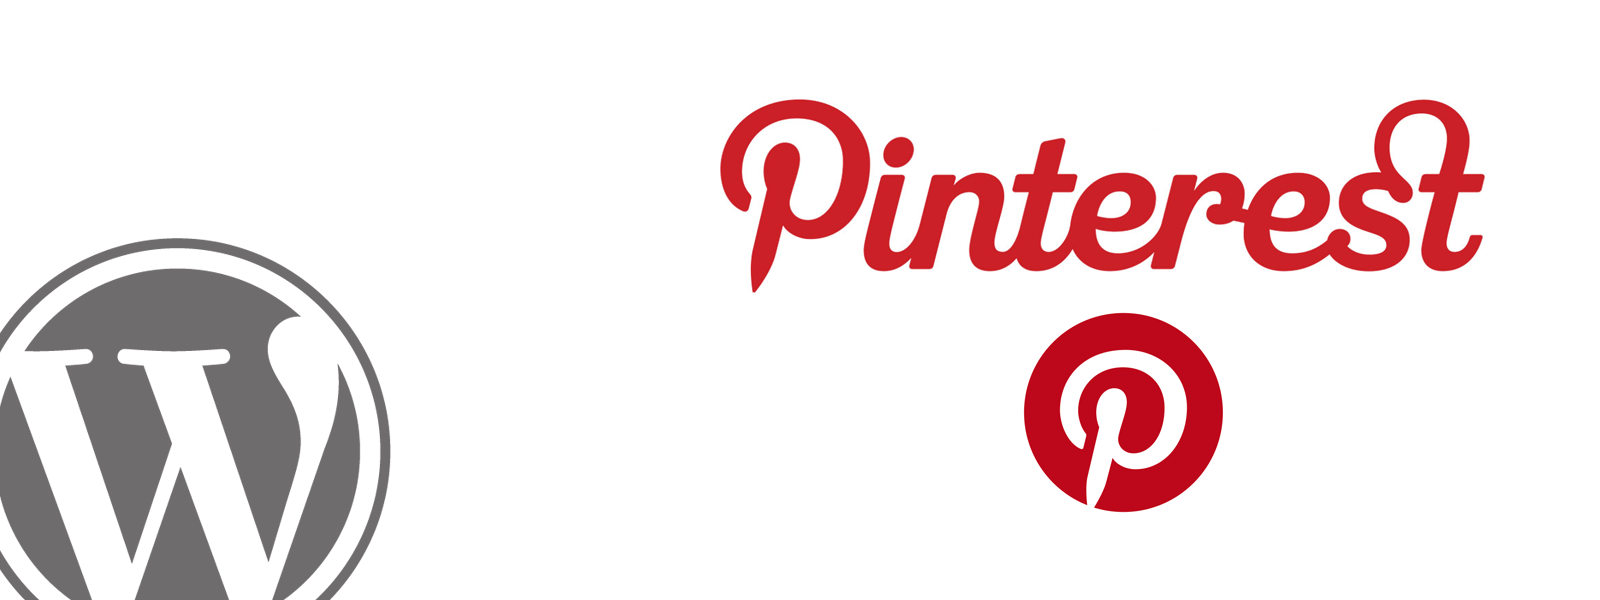 How to Show a Pinterest Image in a WordPress post or page?